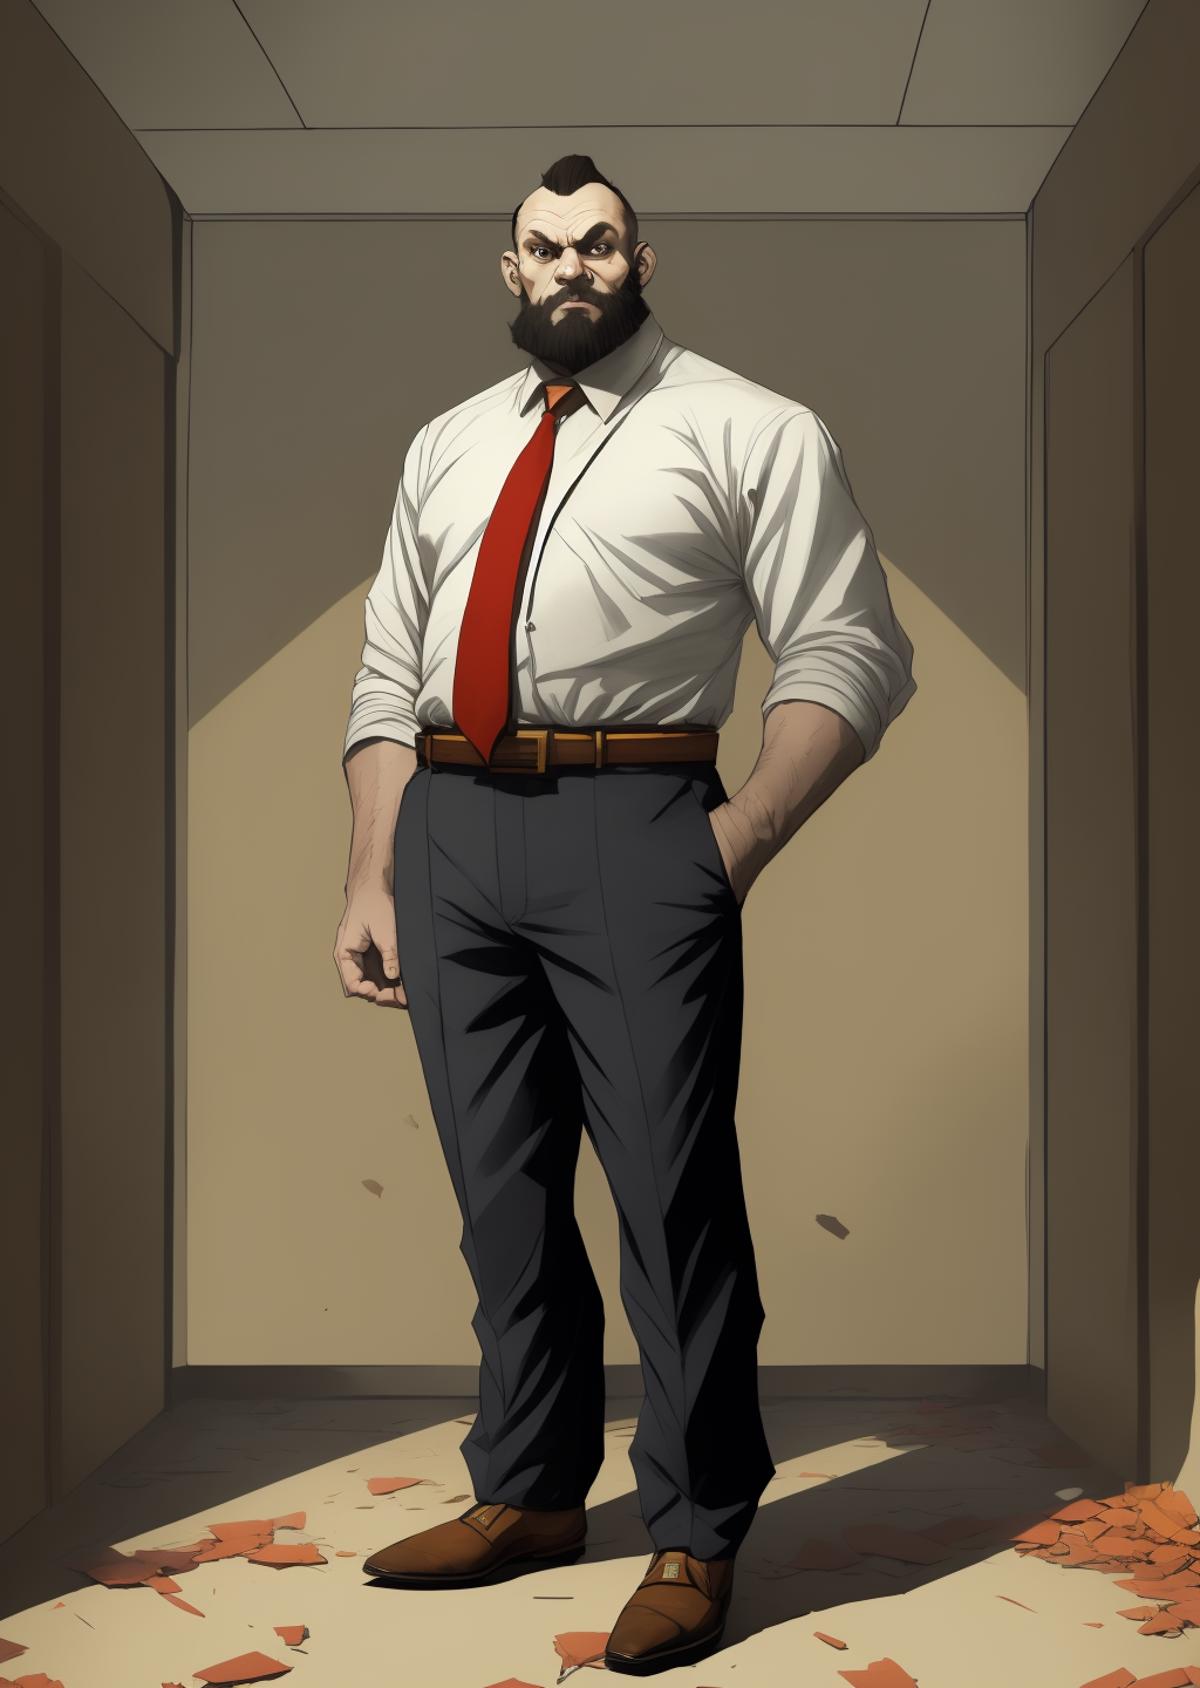 Zangief - Street Fighter Character image by Clumsy_Trainer